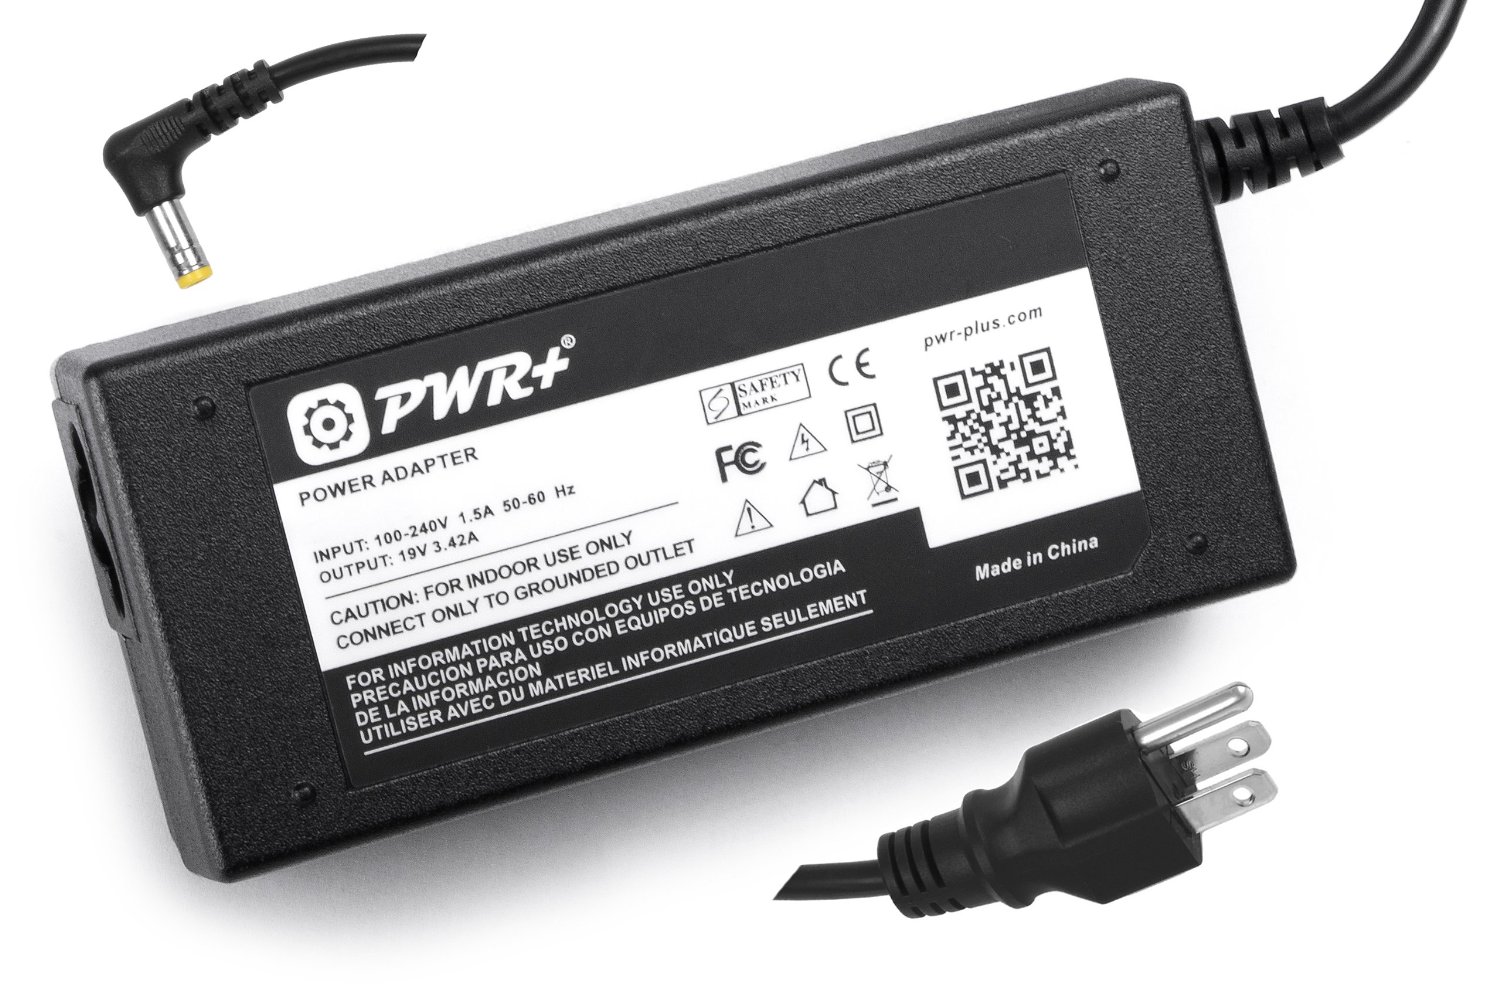 Pwr+® 14 Ft AC Adapter Charger for Acer Monitor H236HL, H236HLbid, S230HL Abd, S231HL, G236HL Bbd, G236HLBbd, S275HL bmii, G276HL, G276HLDbd, G276HLDbmid, S232HL, S271HL, G246HL Abd, S202HL, HN274H, H226HQL, H226HQLbid, G206HL, S220HQL, S220HQLAbd, S240HL, S242HL, S242HLbid, G226HQL Bbd, G226HQLBbd, S236HL, S241HL, G206HQL bd, G206HQLbd, H276HL, S200HQ, Q236HL, UM.VG6AA.B01 Power Supply Cord